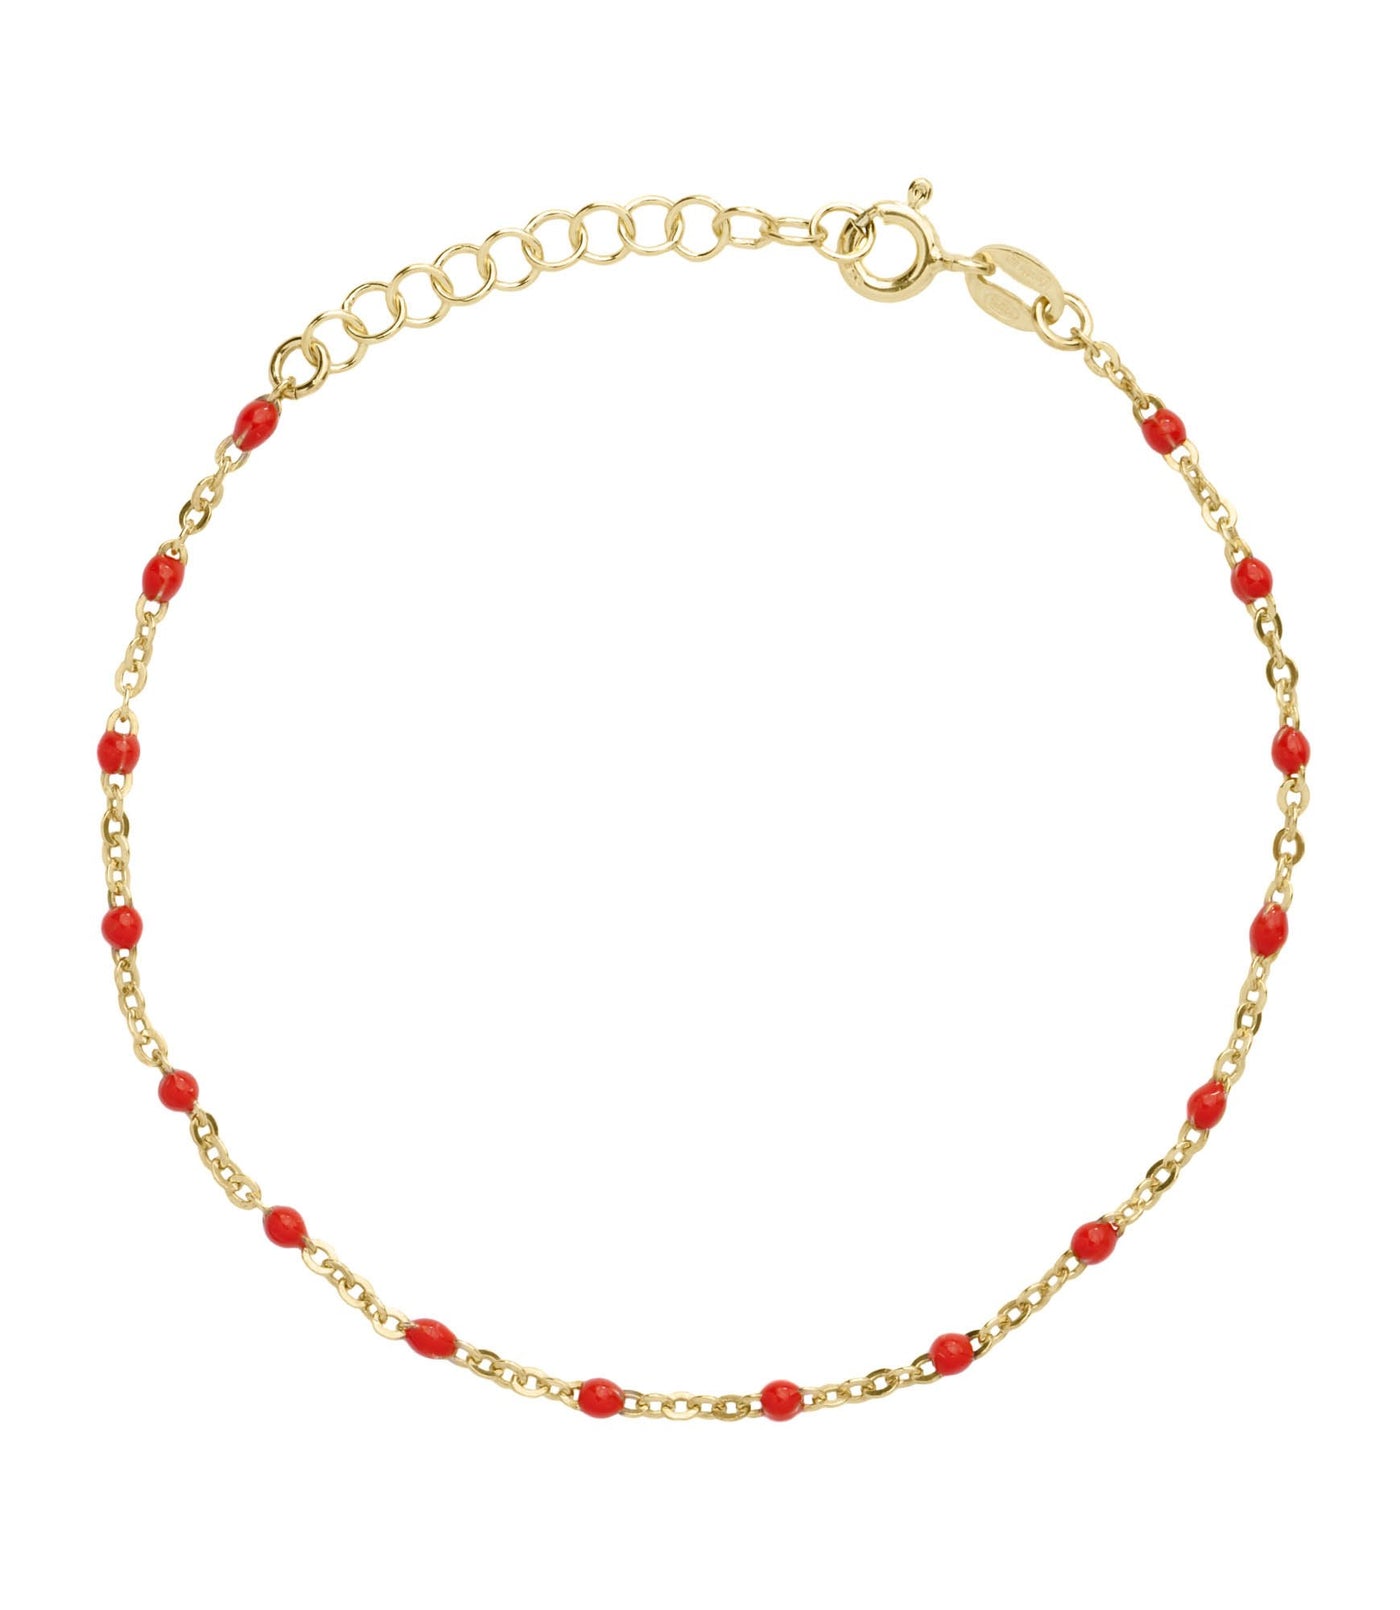 MARIN | SOMMERLICHES ARMBAND | GOLD - ROT